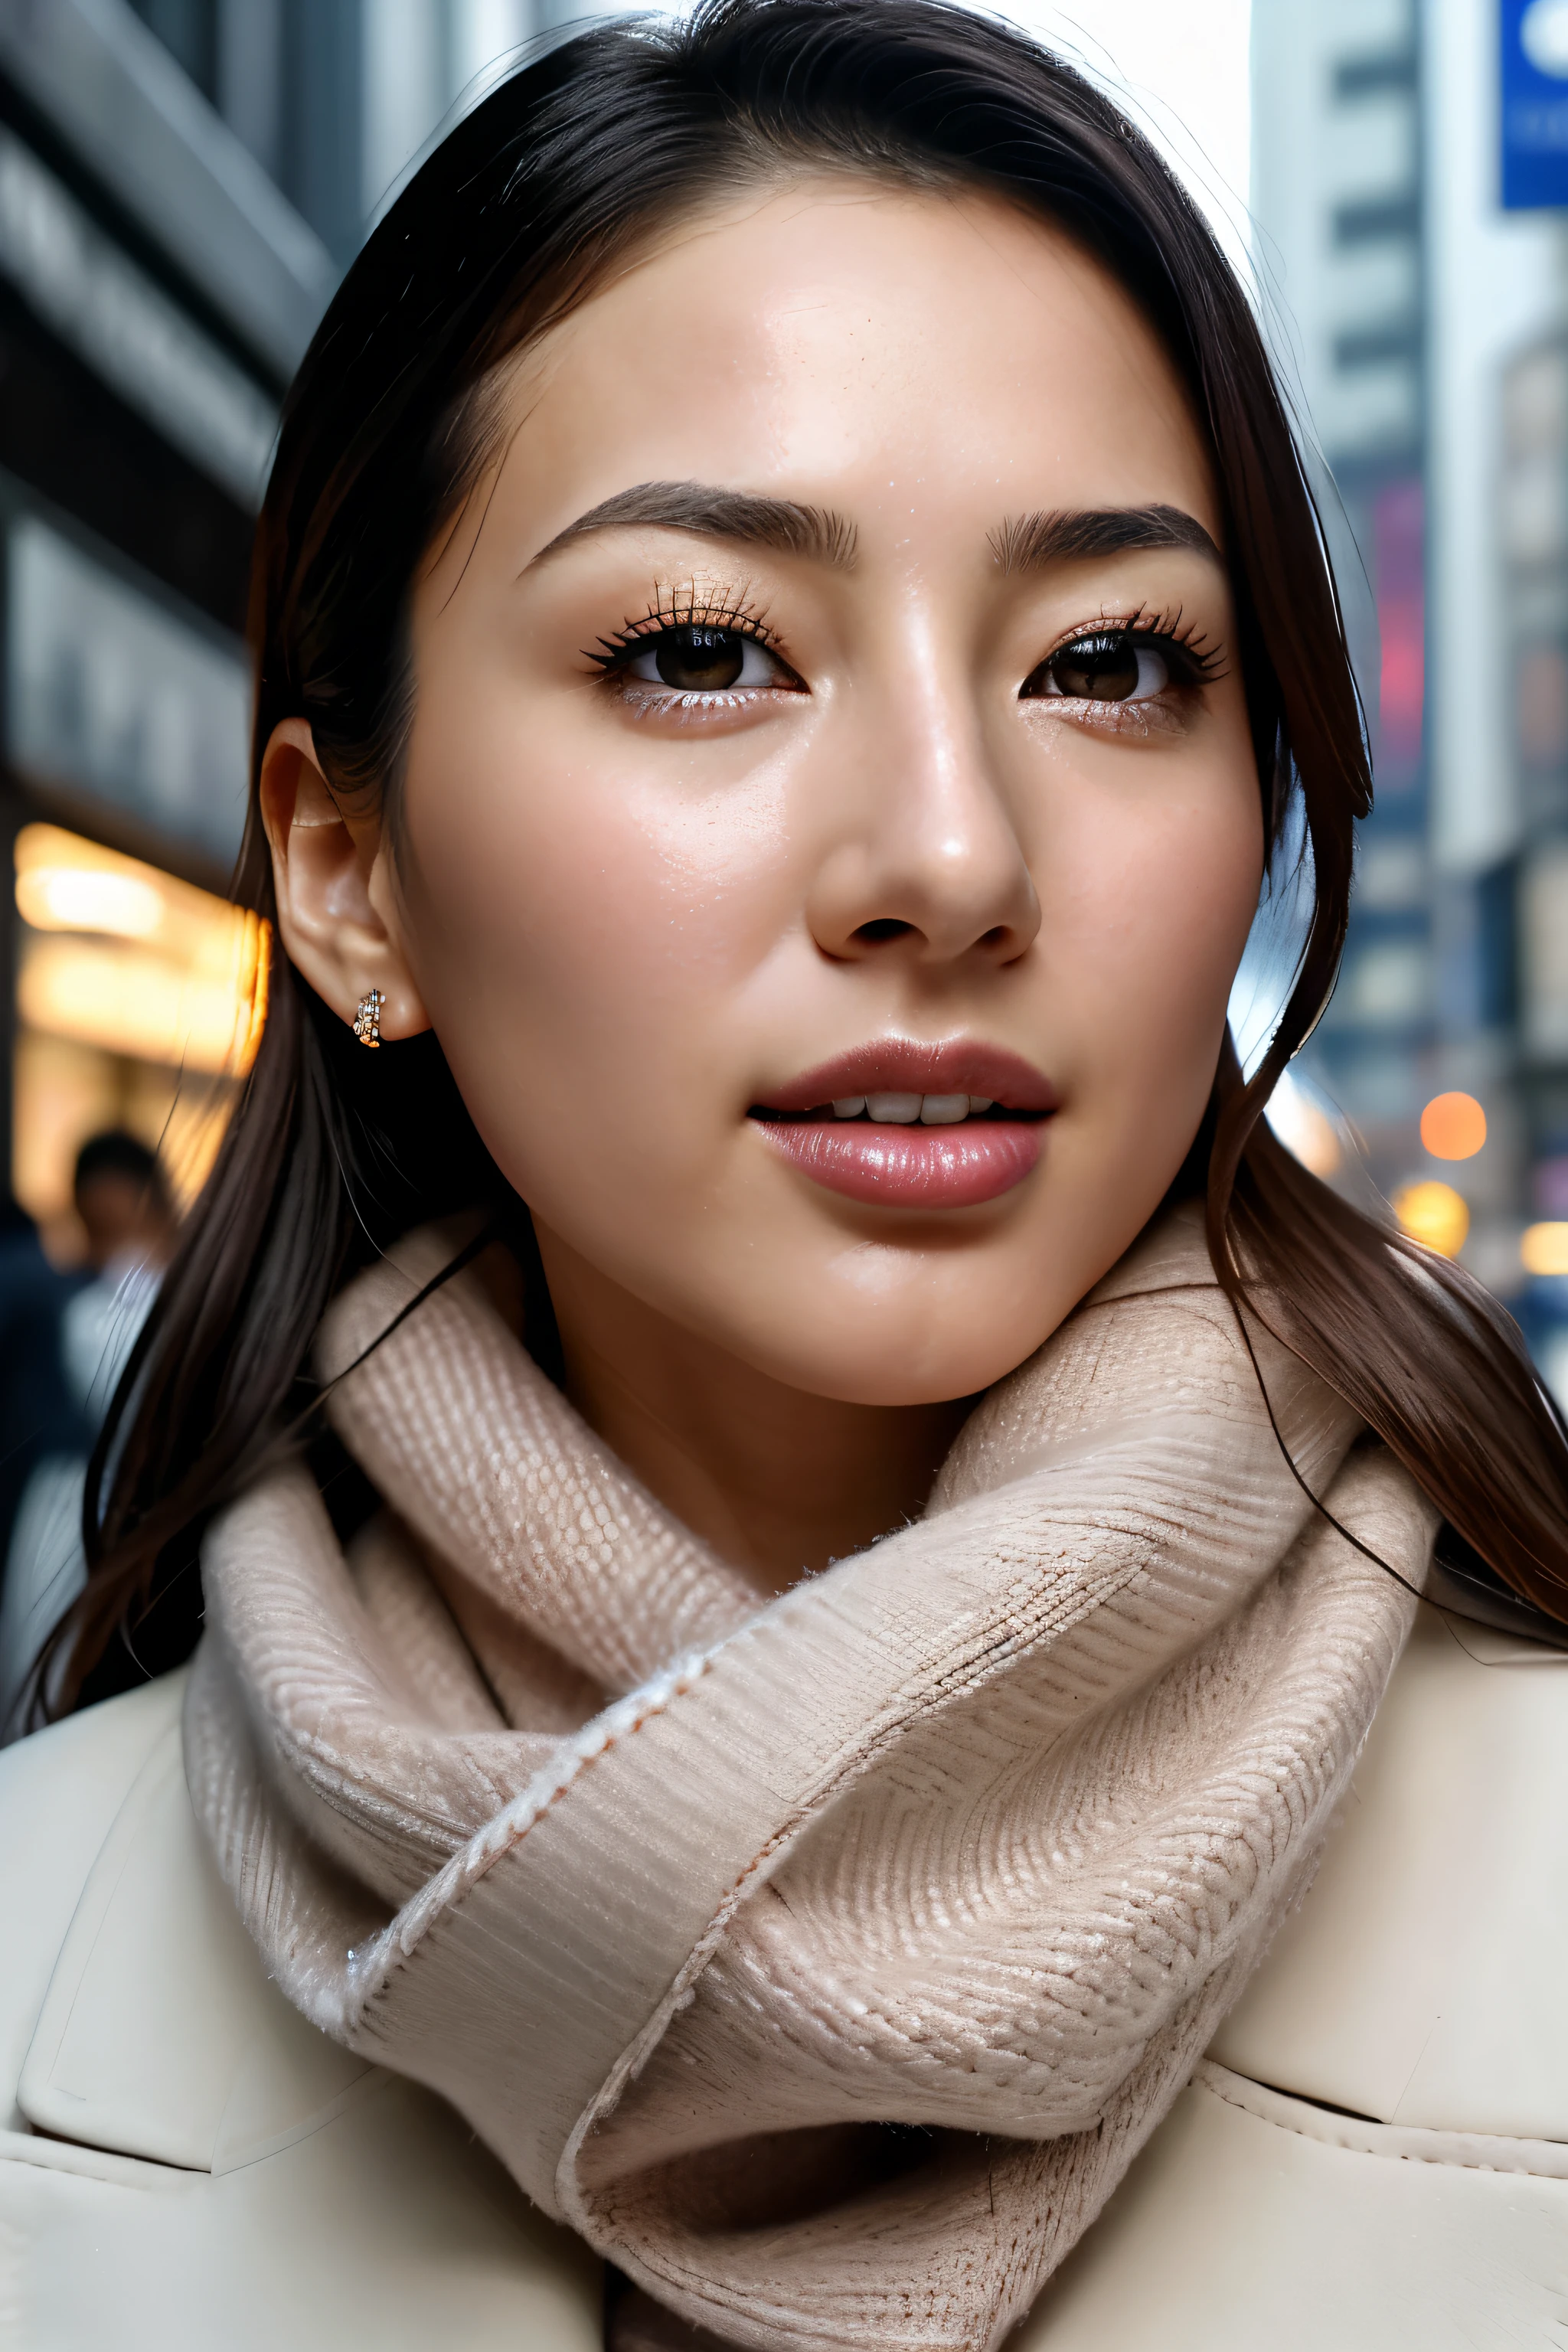 beautiful japanese actress,1 girl,debris flies,,Award-winning photo, very detailed, focus the eyes clearly, nose and mouth,face focus, super close up of face、 35 years old,black hair、symmetrical face,realistic nostrils、Angle from below、Elongated C-shaped nostril NSFW,(sharp nose)skin shining with sweat、shiny skin,(wrinkles between eyebrows))（cum on tongue)、deep kiss、((thin eyebrows))oily skin、radiant glowing skin、double eyelid、、Beautiful woman、medium hair,roll your eyes、shortcut、(Winter streets、long coat、sweater、sca can see the sky、Shibuya Center Street、